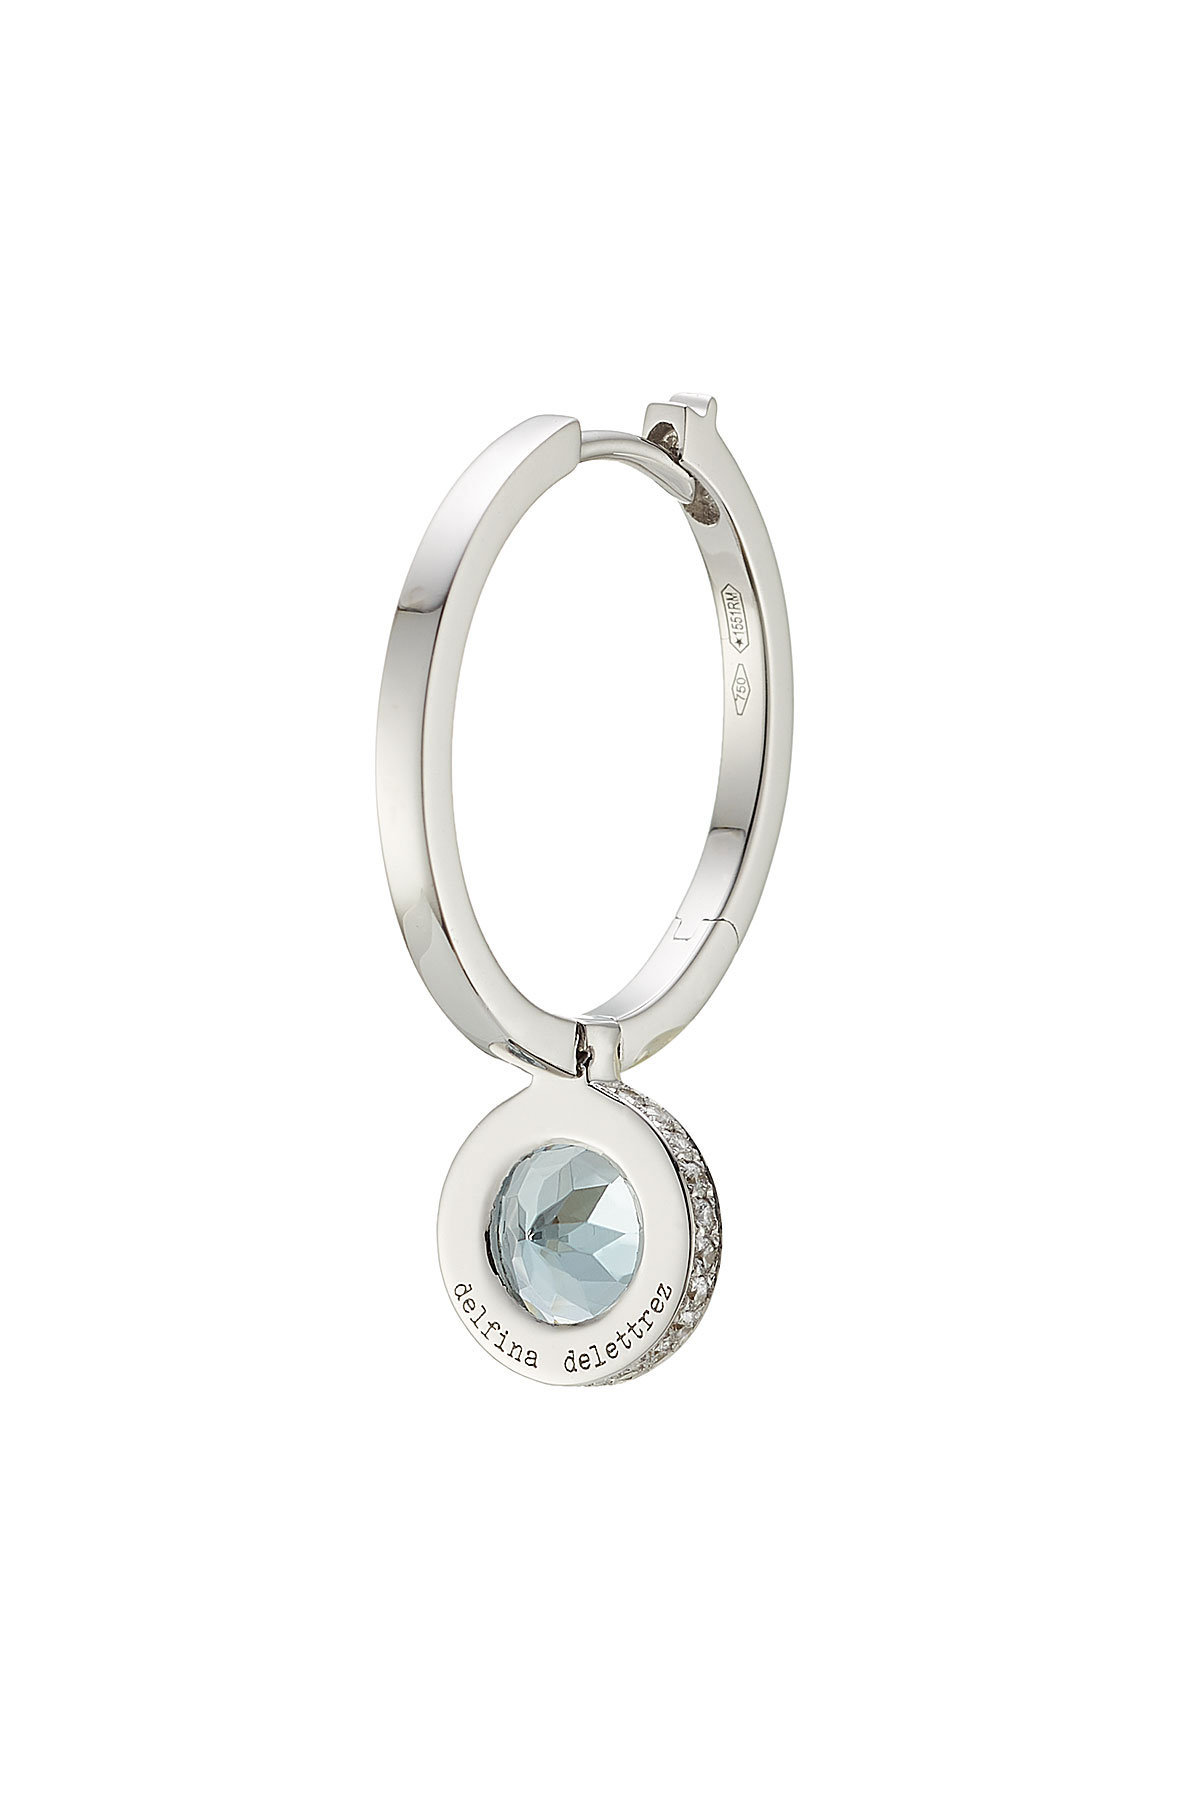 Seal 18kt White Gold Hoop Earring with Aquamarine and White Diamonds by Delfina Delettrez